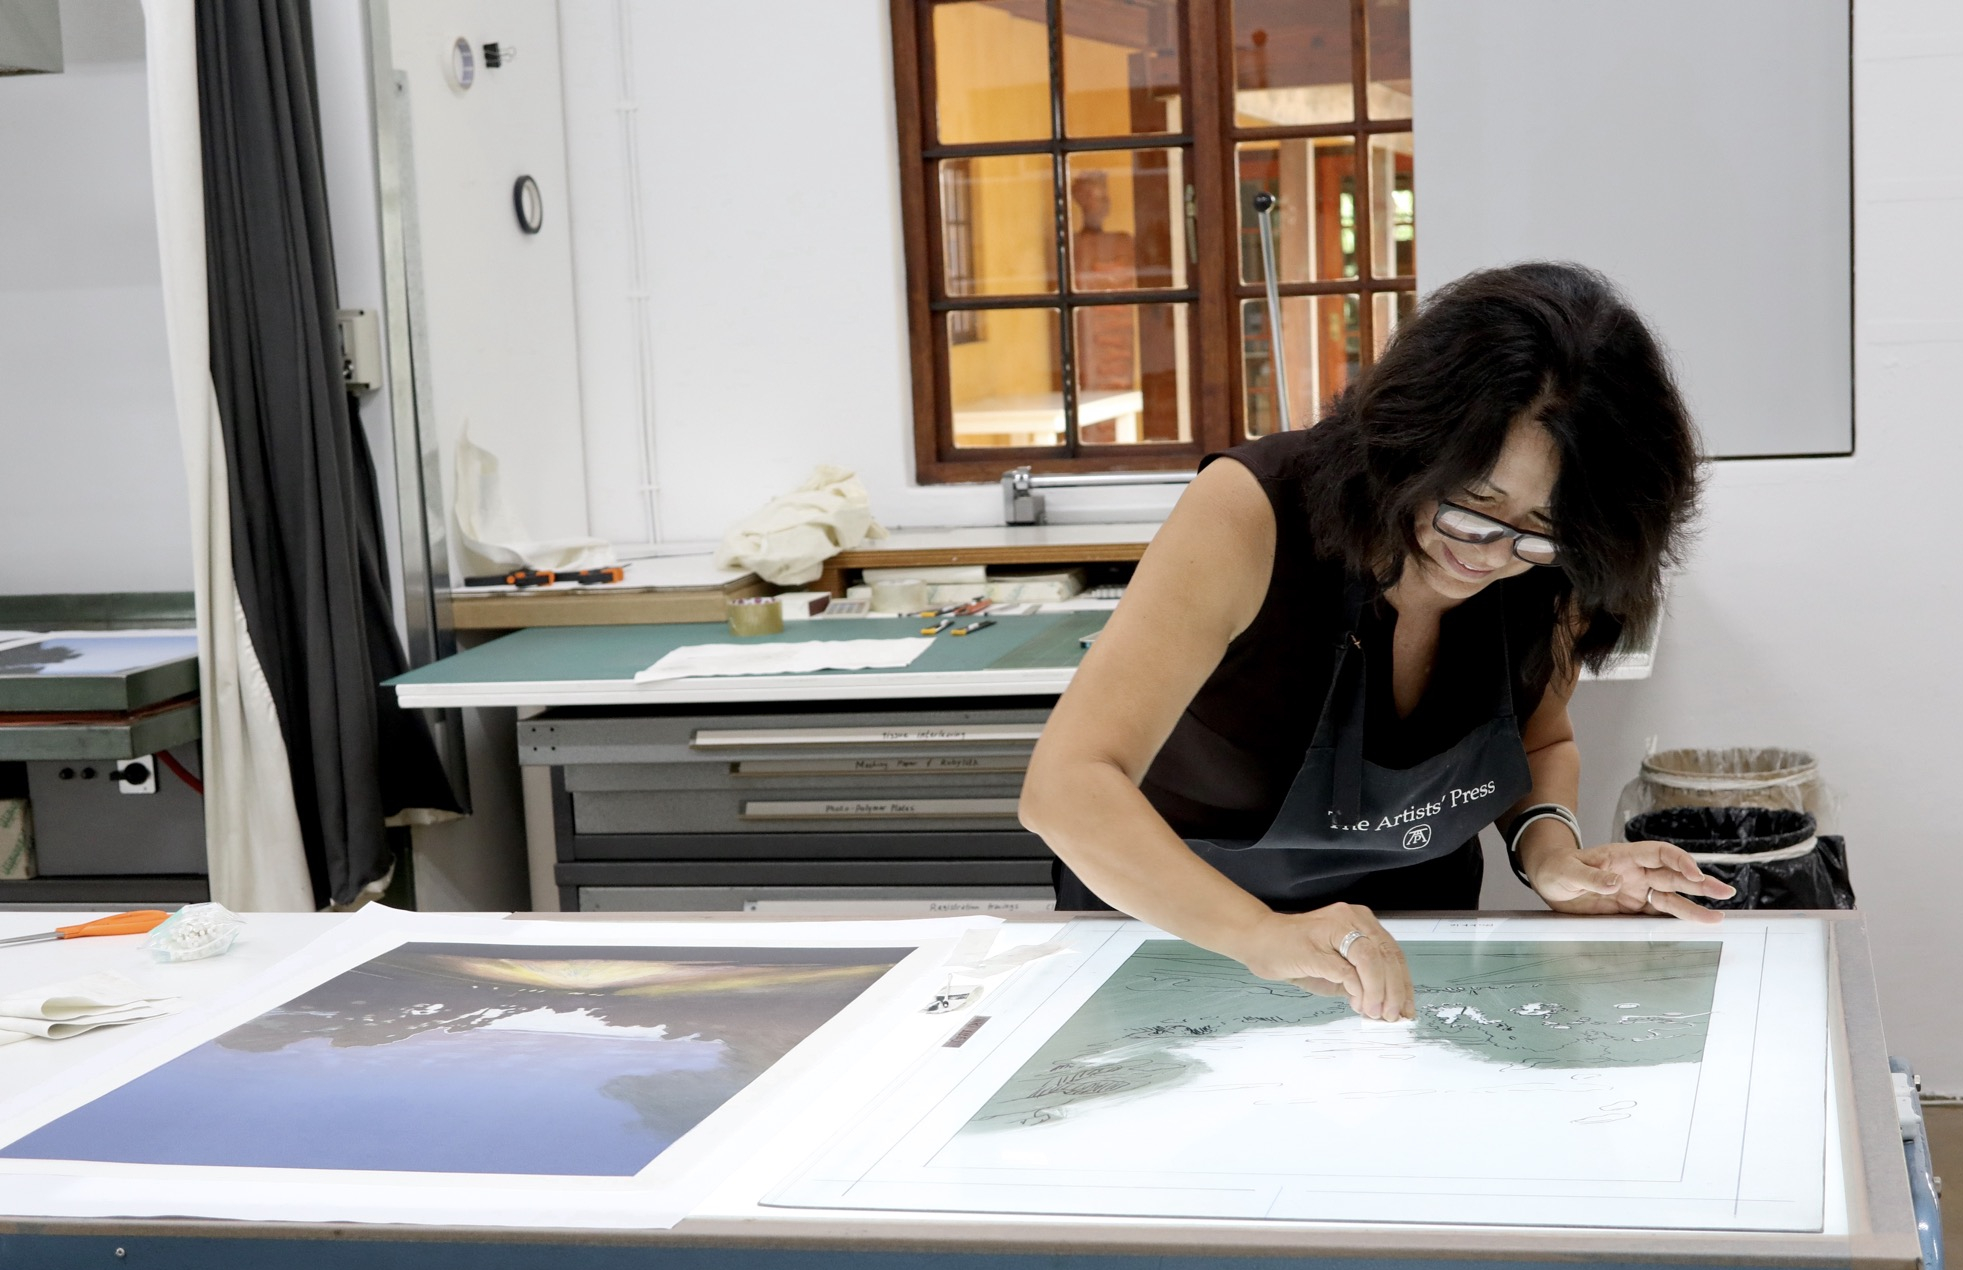 Maria Marais working on a monoprint plate at The Artists' Press